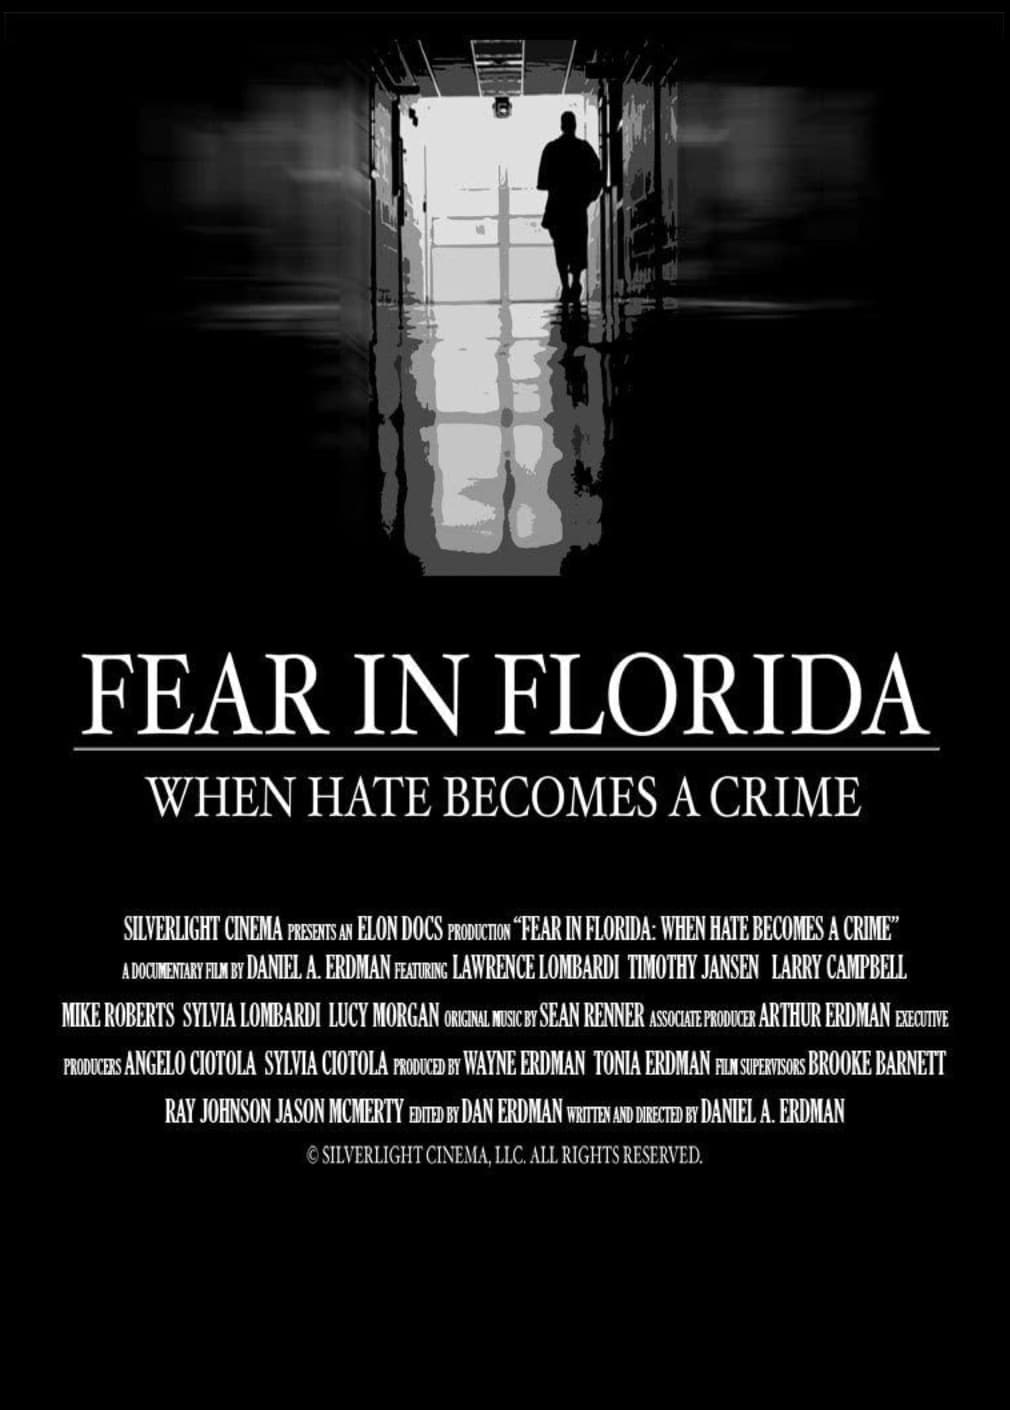 Fear in Florida: When Hate Becomes a Crime